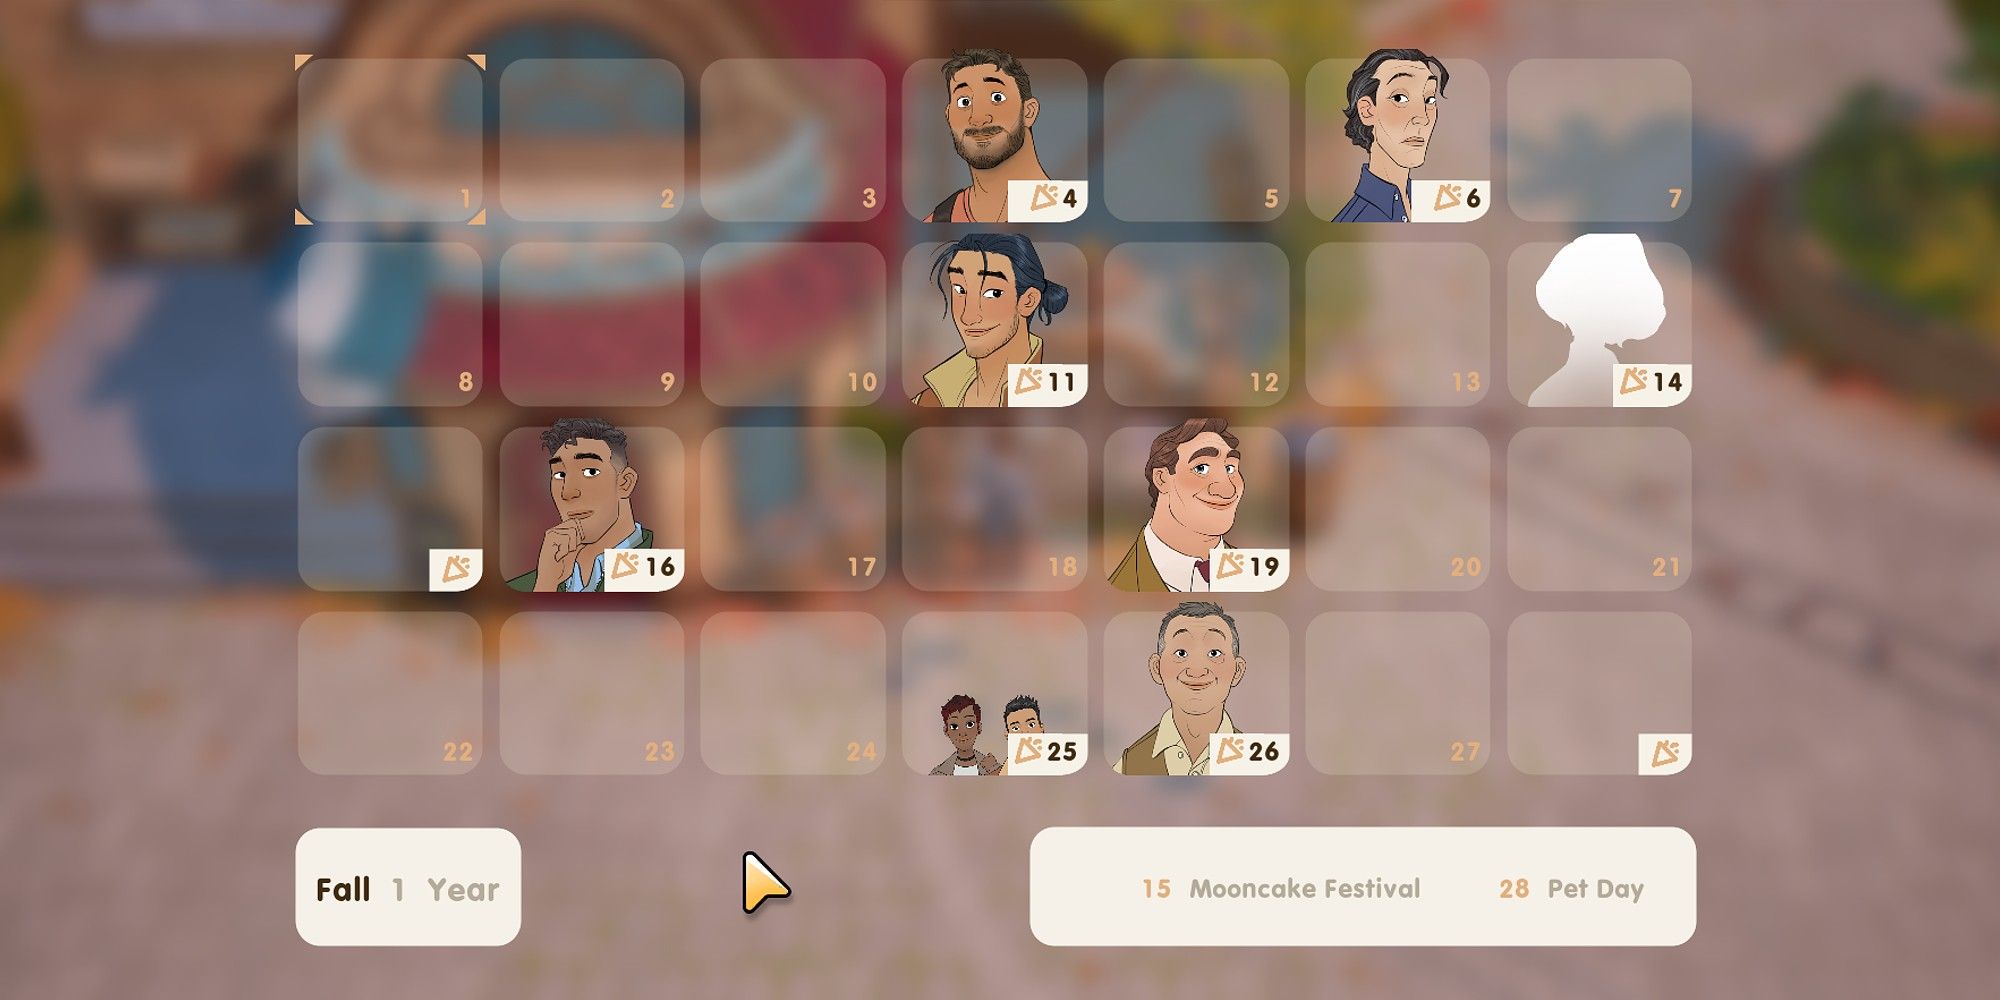 The calendar found in the town centre shows everyone's birthdays as well as festivals in Coral island